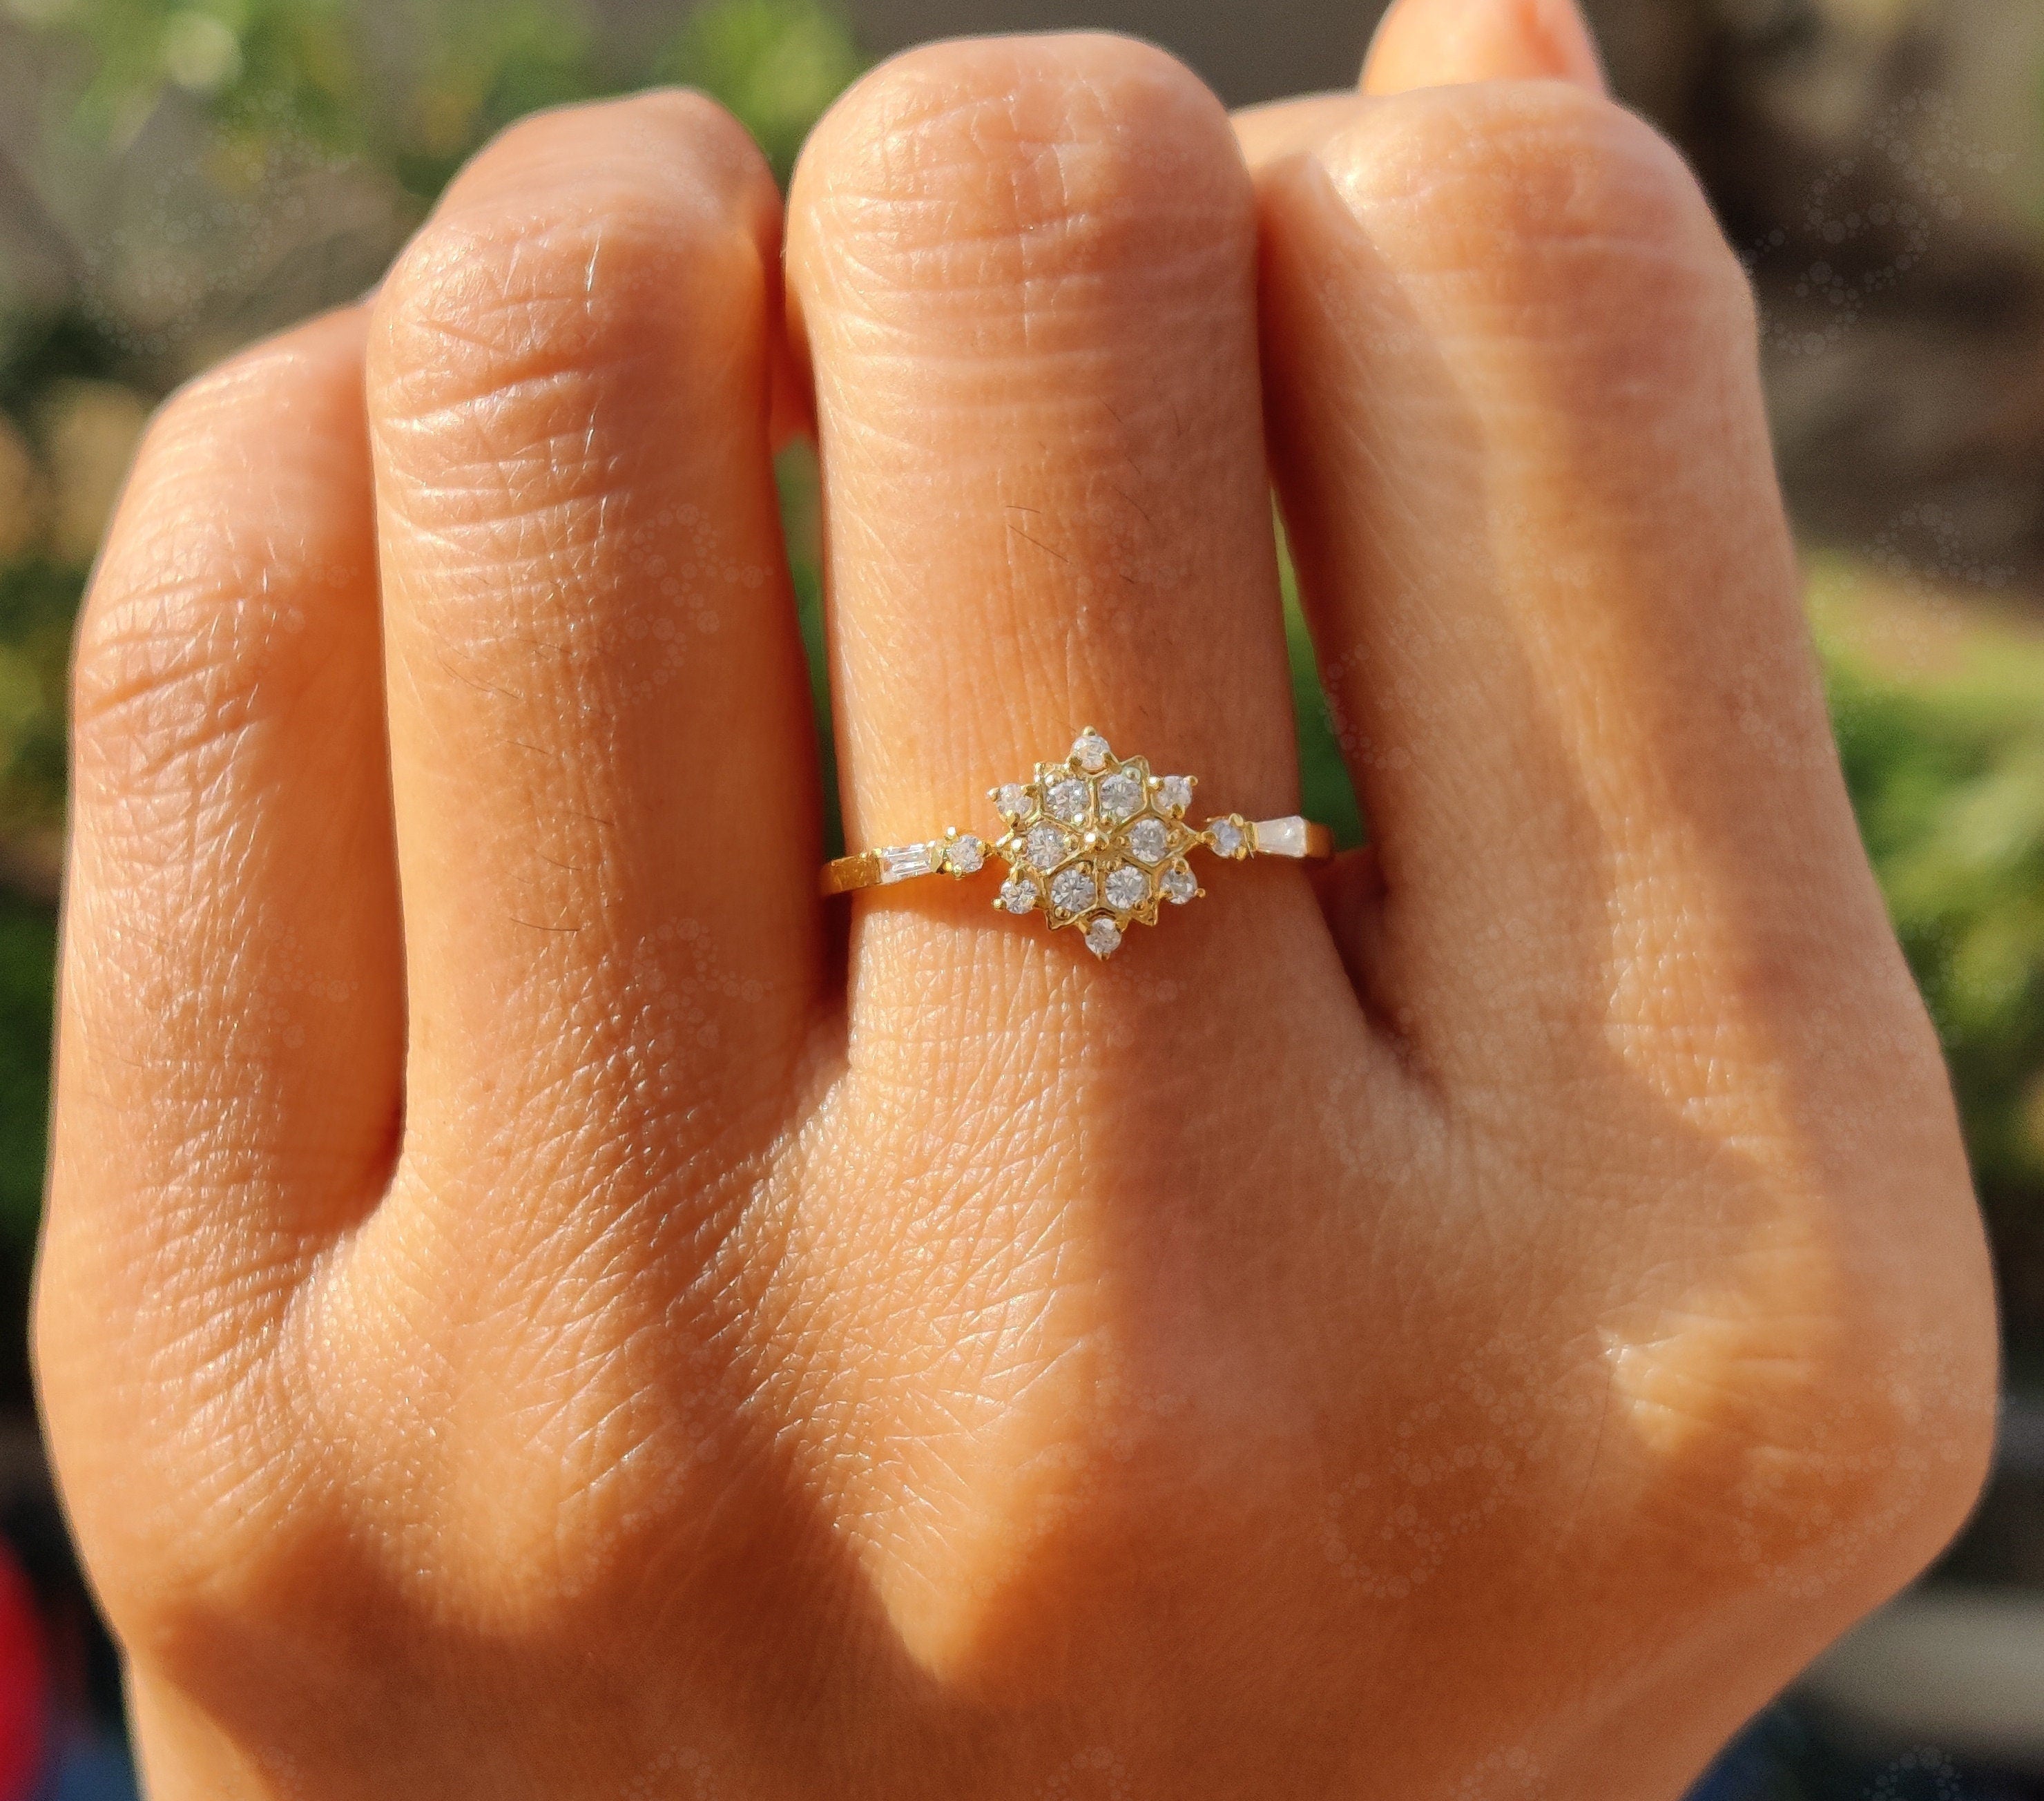 Vintage Floral Moissanite Stacking Ring: A Timeless Blend of Silver and Gold, a Delicate Art Deco Design to Elevate Your Style, Perfect for a Nature-Inspired Promise or Minimalist Statement Ring